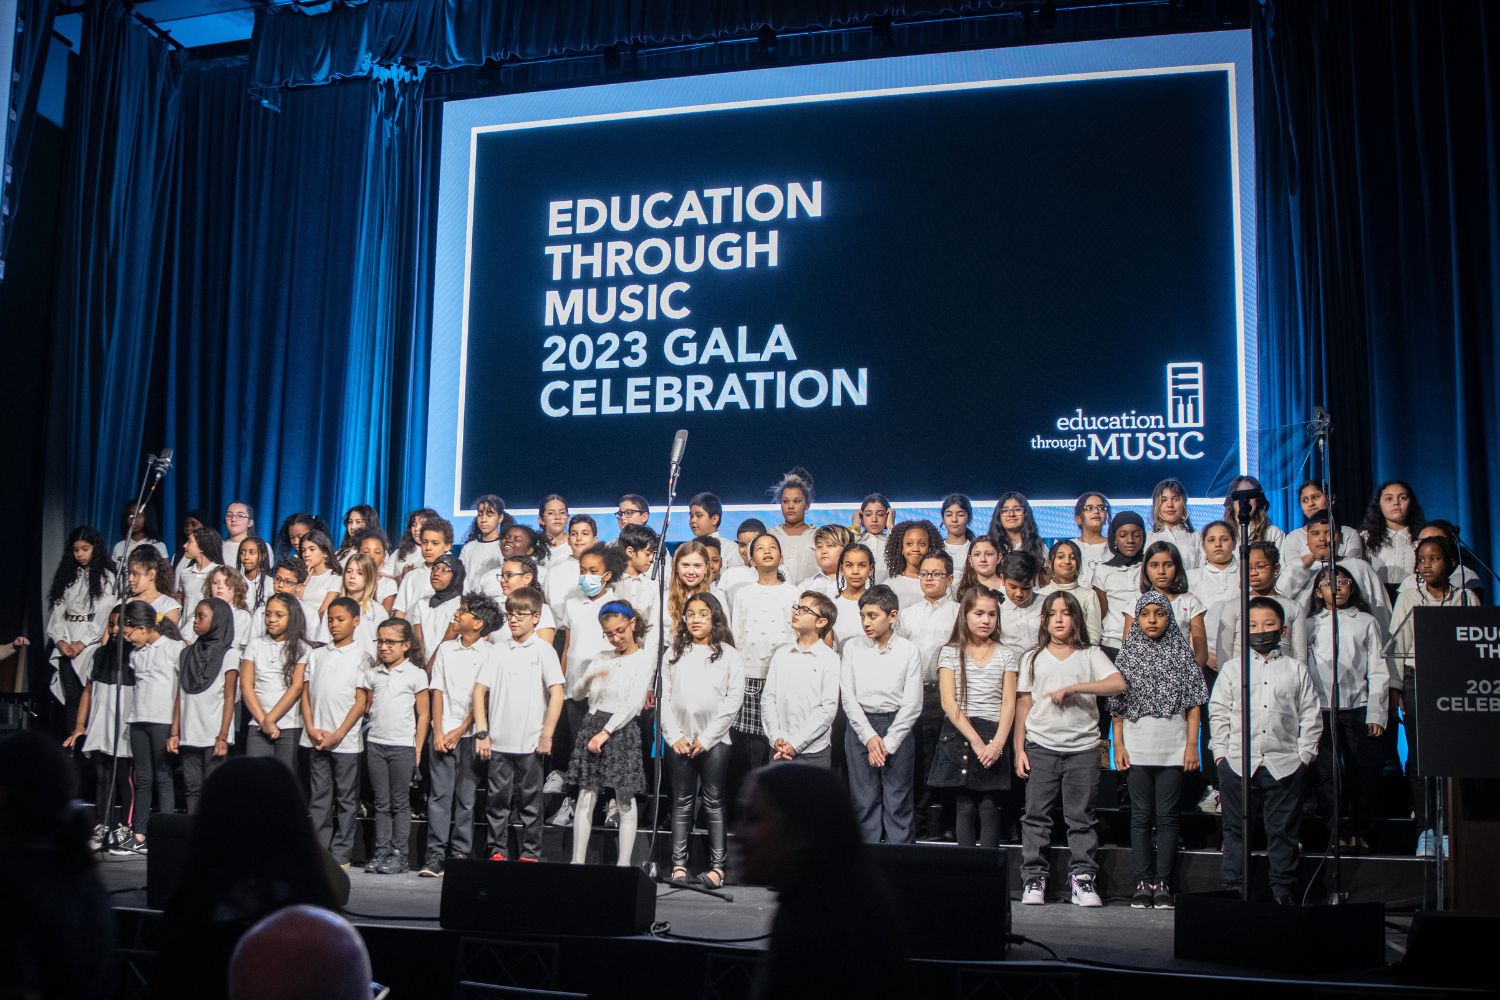 Andy Hilfiger rocks the night with students at the ETM 2023 Gala Celebration